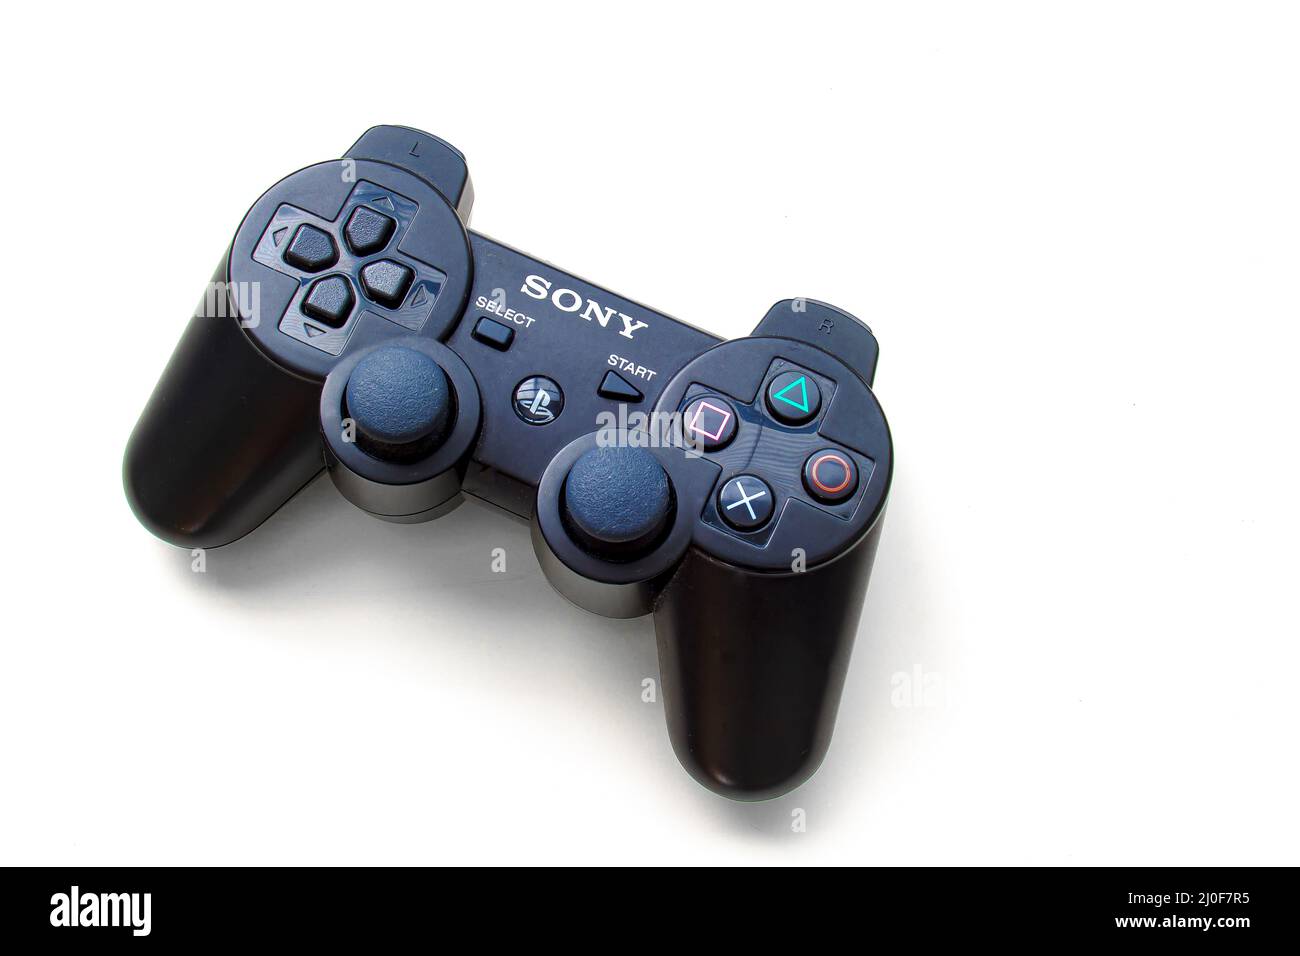 Calgary, Alberta, Canada. July 20, 2020. Black Sony Play Station control remote on a white background Stock Photo